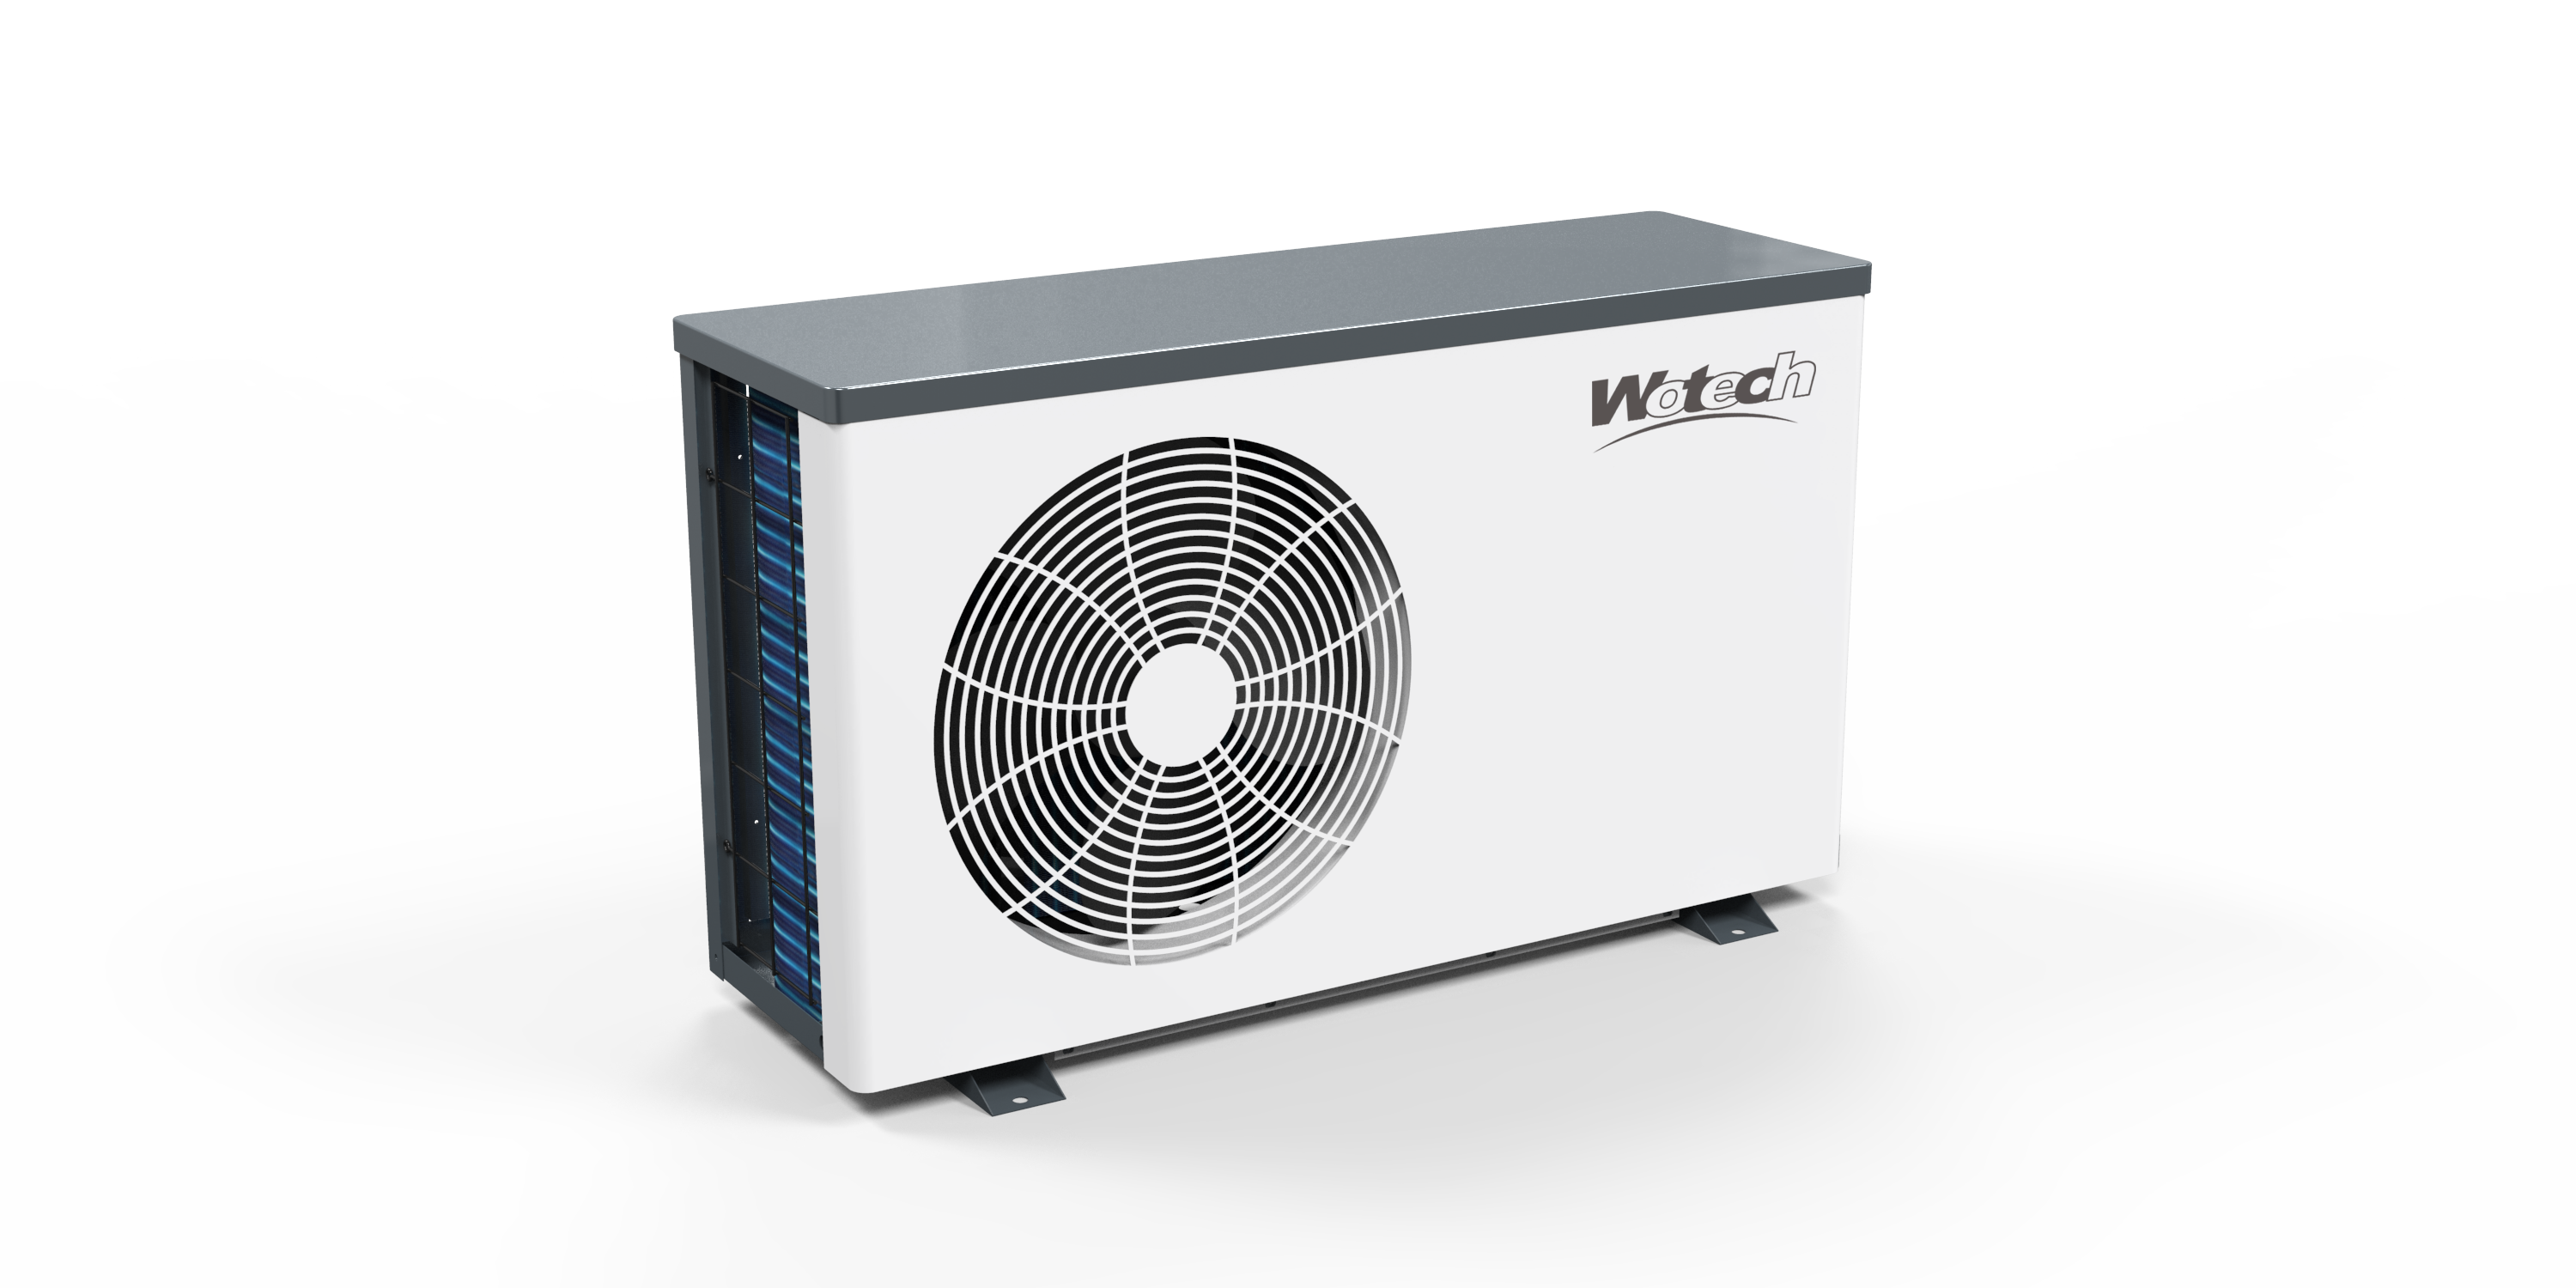 Energy-saving Air source heat pump with Eco Inverter and WIFI features